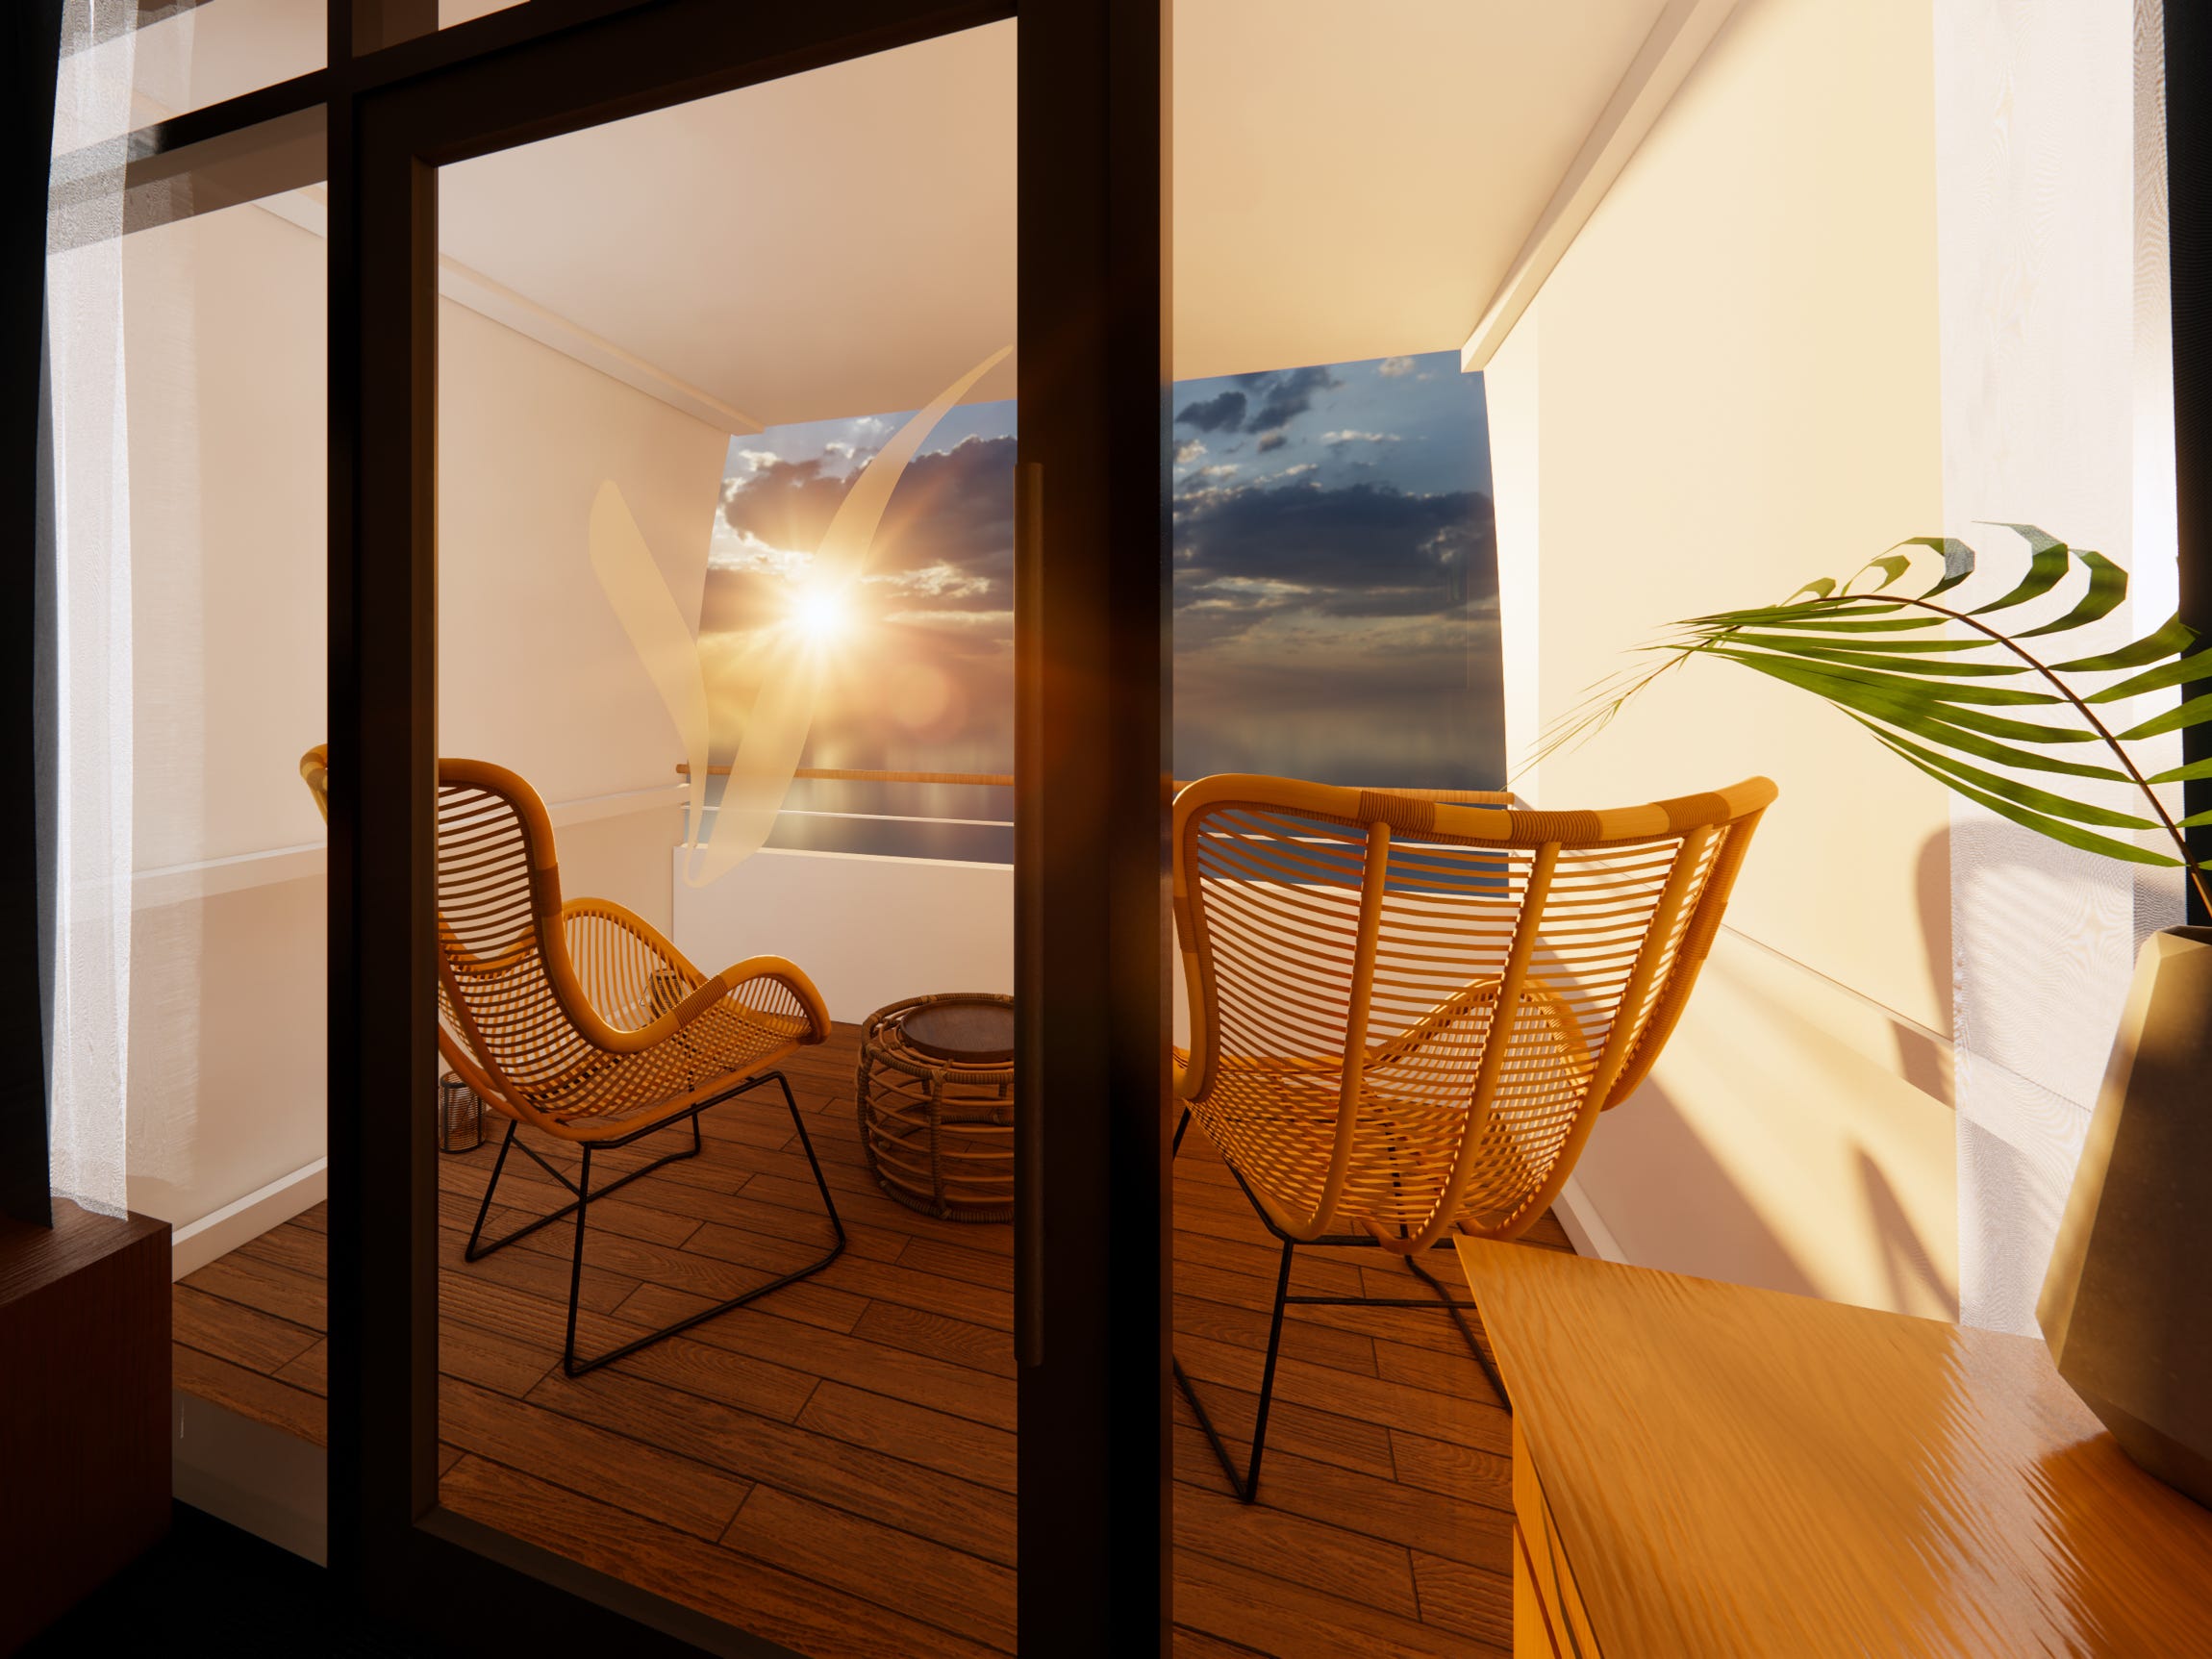 A rendering of a balcony overlooking the ocean